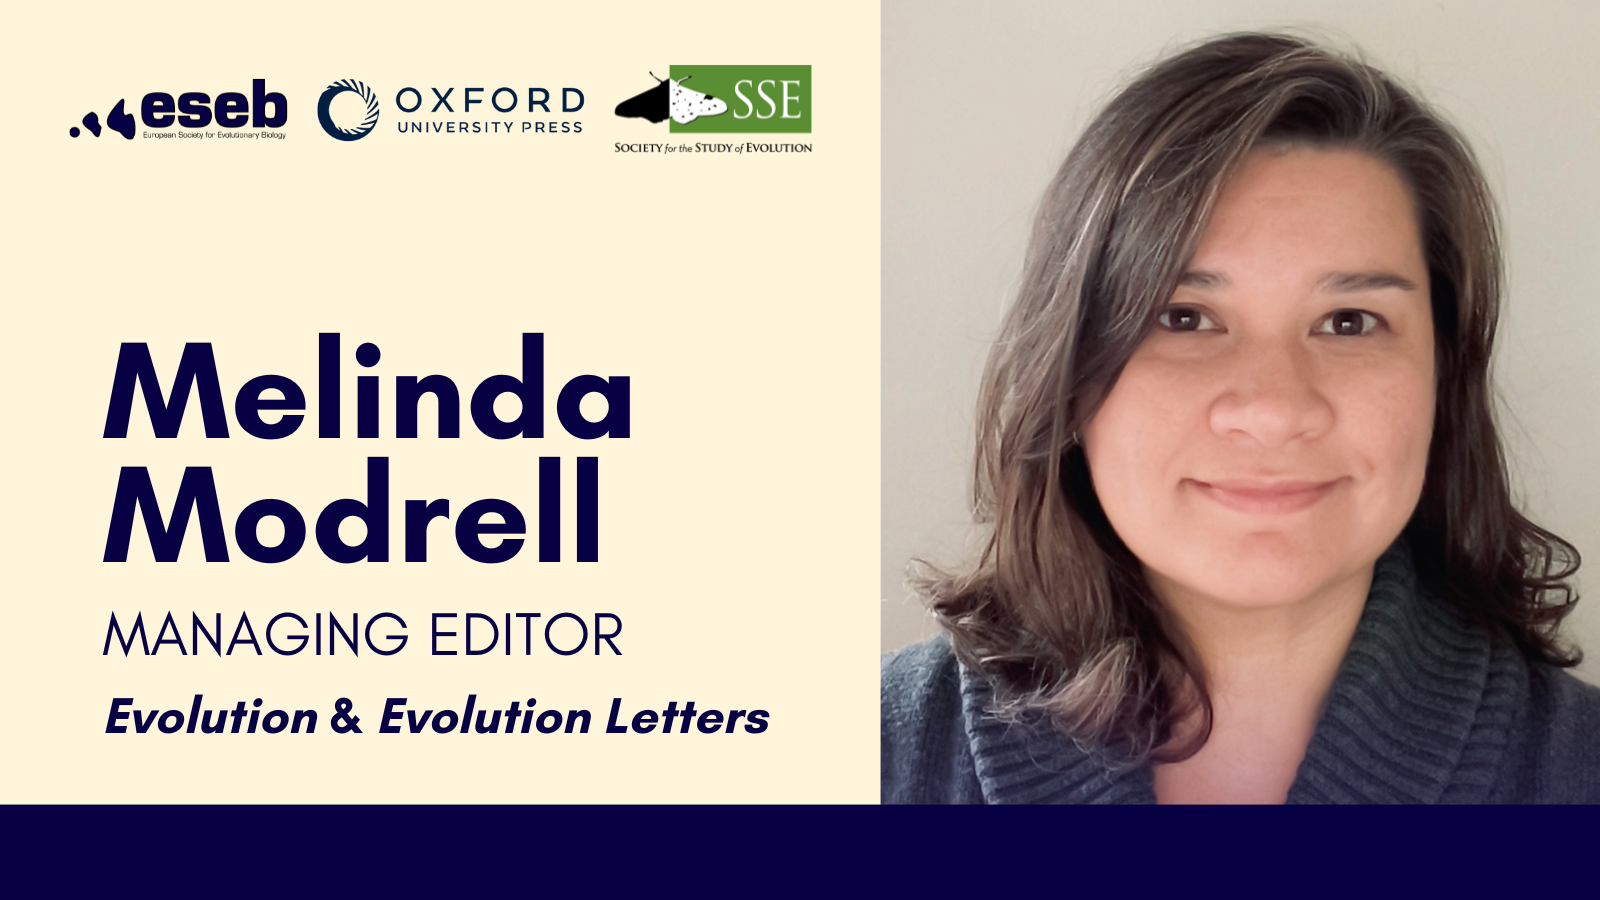 Logos: SSE, ESEB, Oxford University Press. Text: Melinda Modrell, Managing Editor, Evolution and Evolution Letters. Next to the text is a photo of Melinda, who has shoulder length dark hair and is wearing a gray sweater.